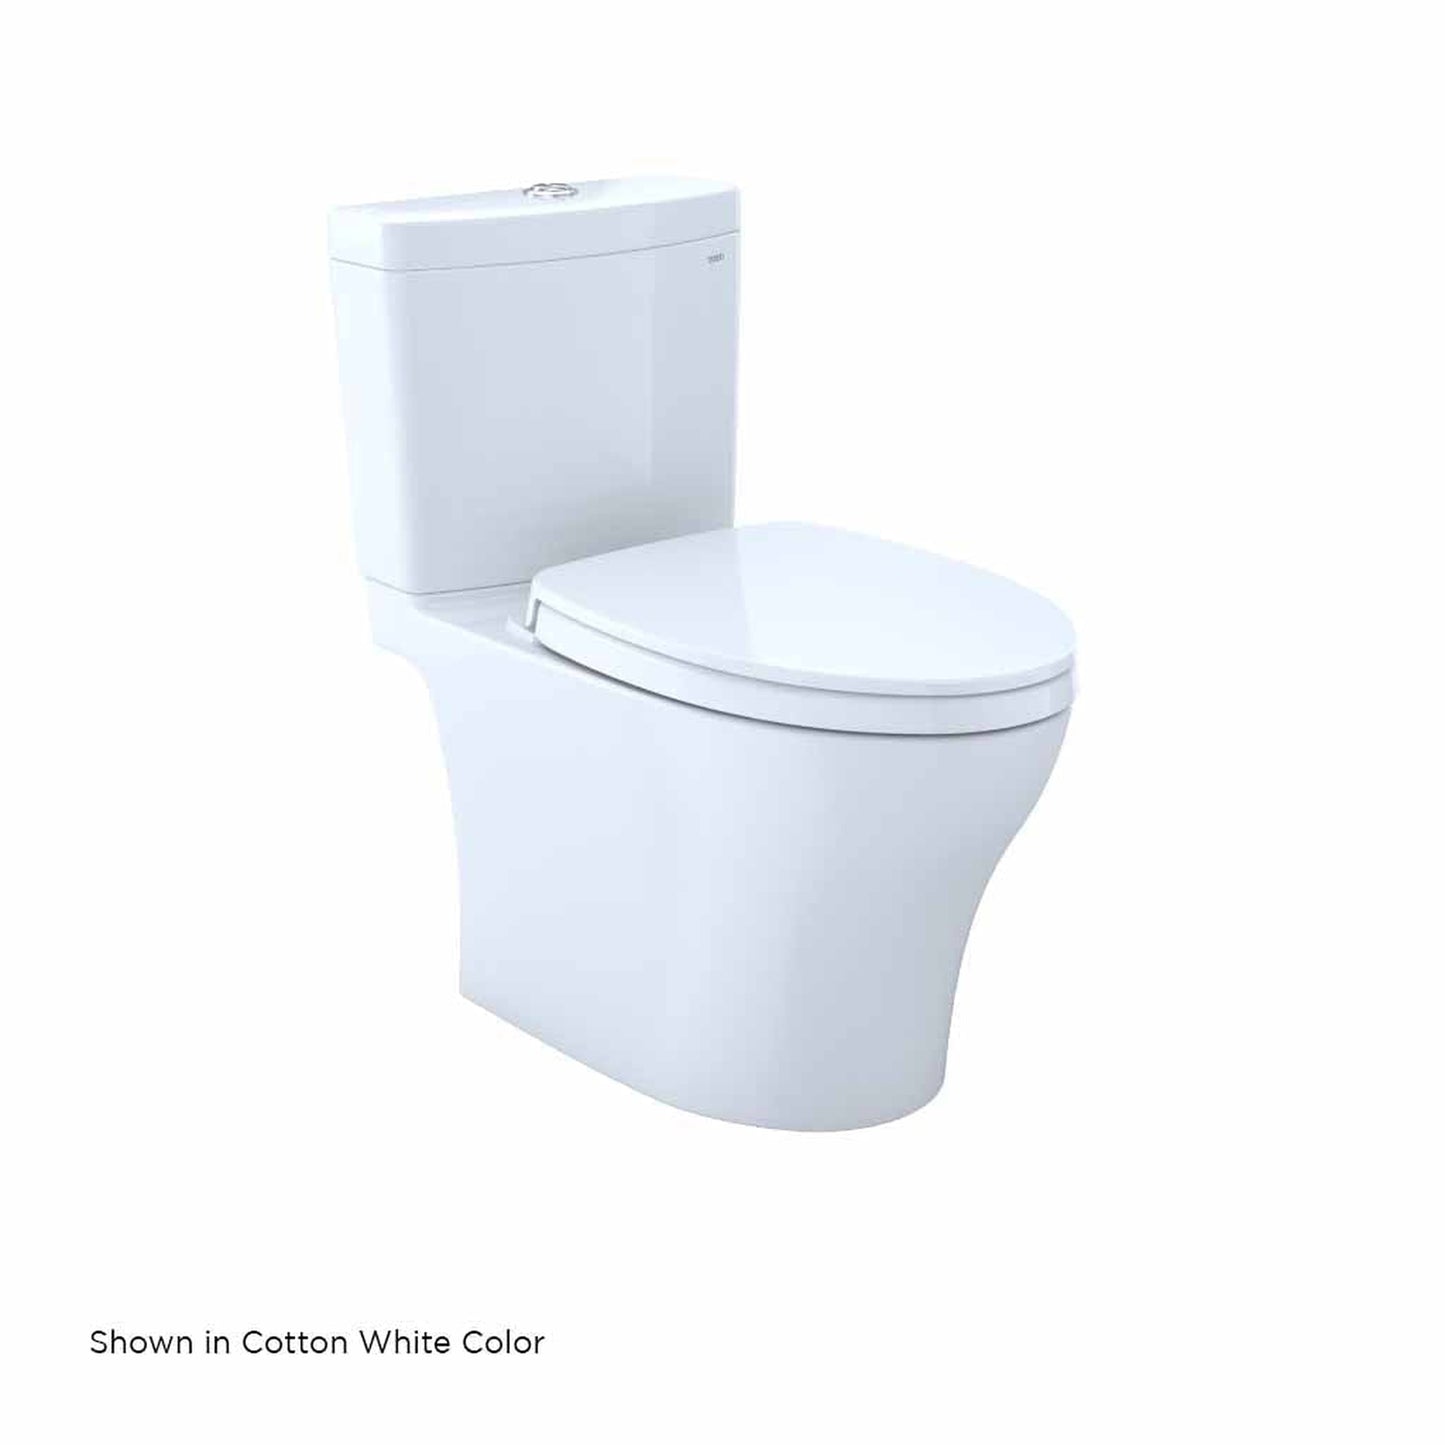 TOTO Aquia IV Sedona Beige 1.28 GPF & 0.8 GPF Dual-Flush Two-Piece Elongated Chair Height Toilet With WASHLET+ Connection - SoftClose Seat Included